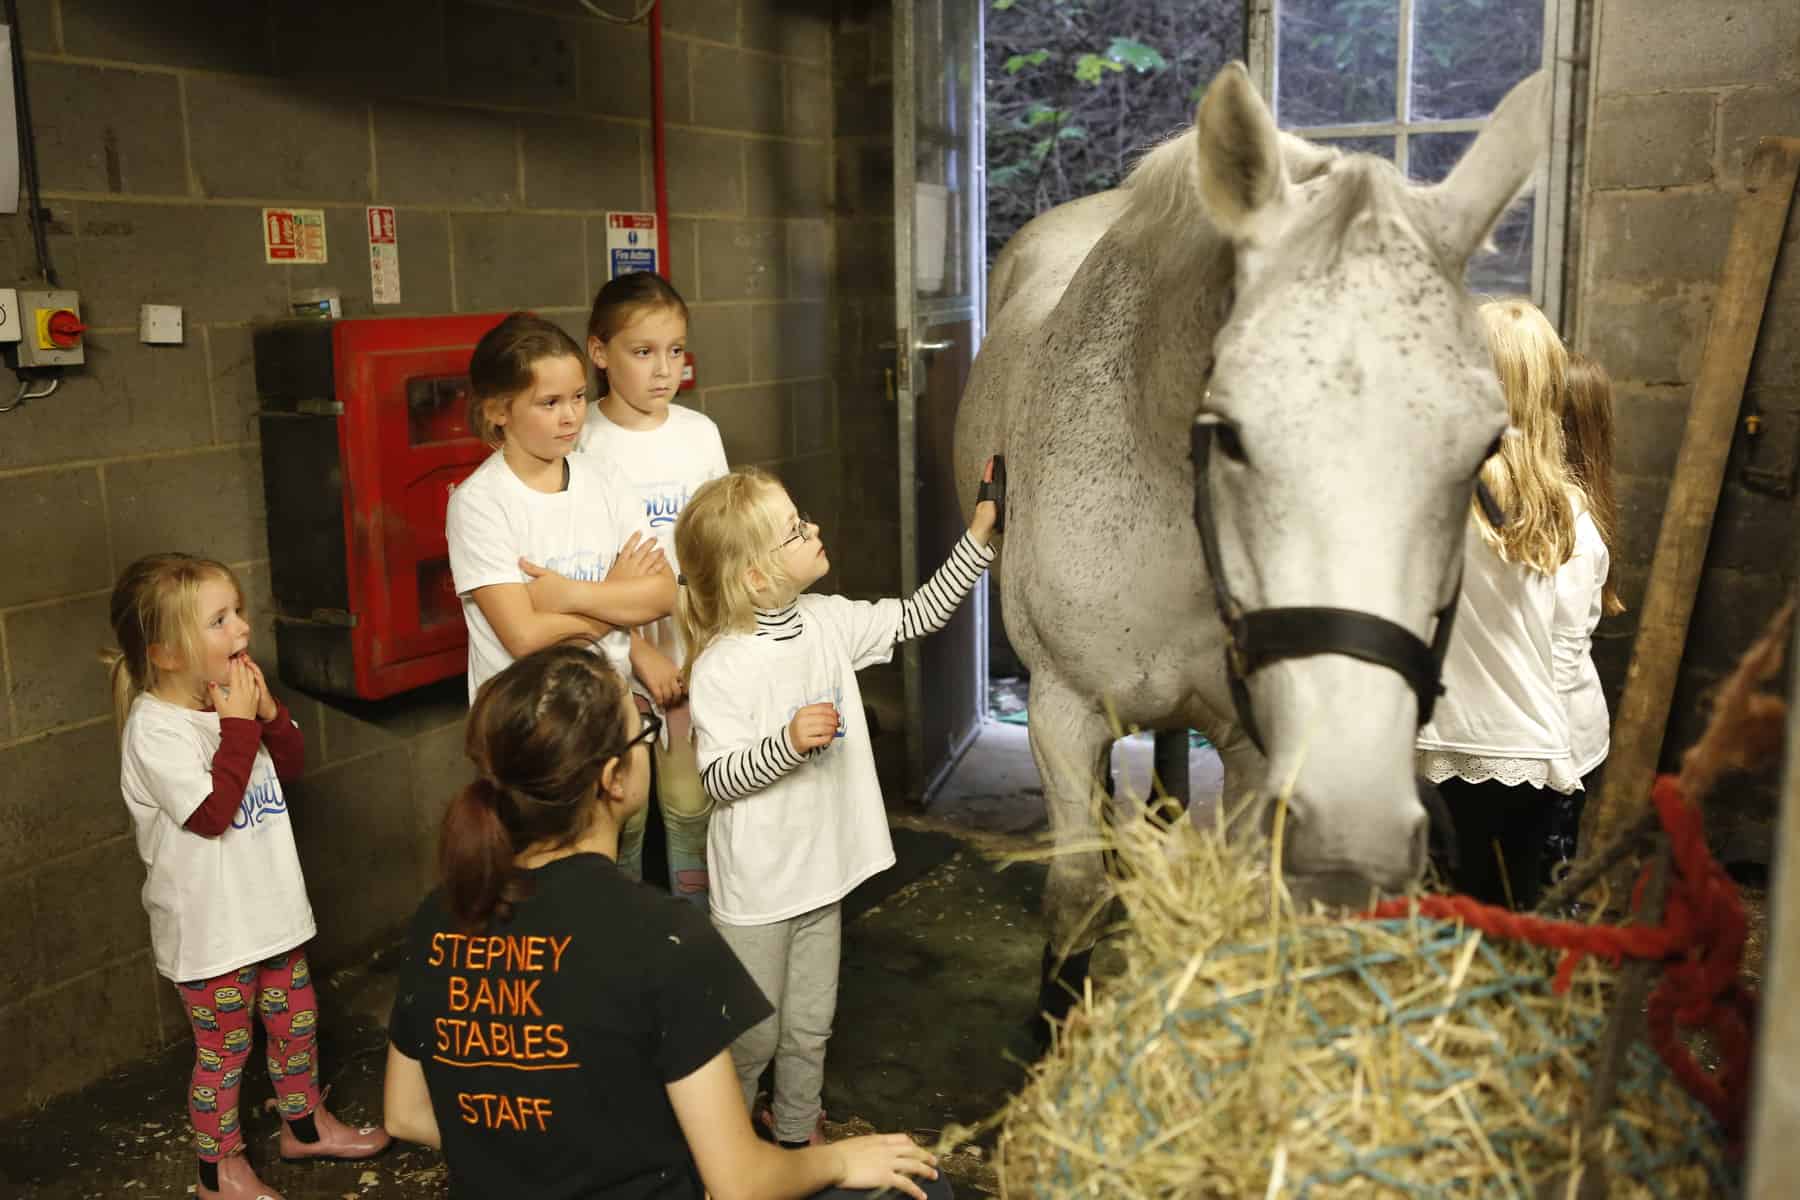 Spirit Riding Free Stable Sleepover children grooming a large horse